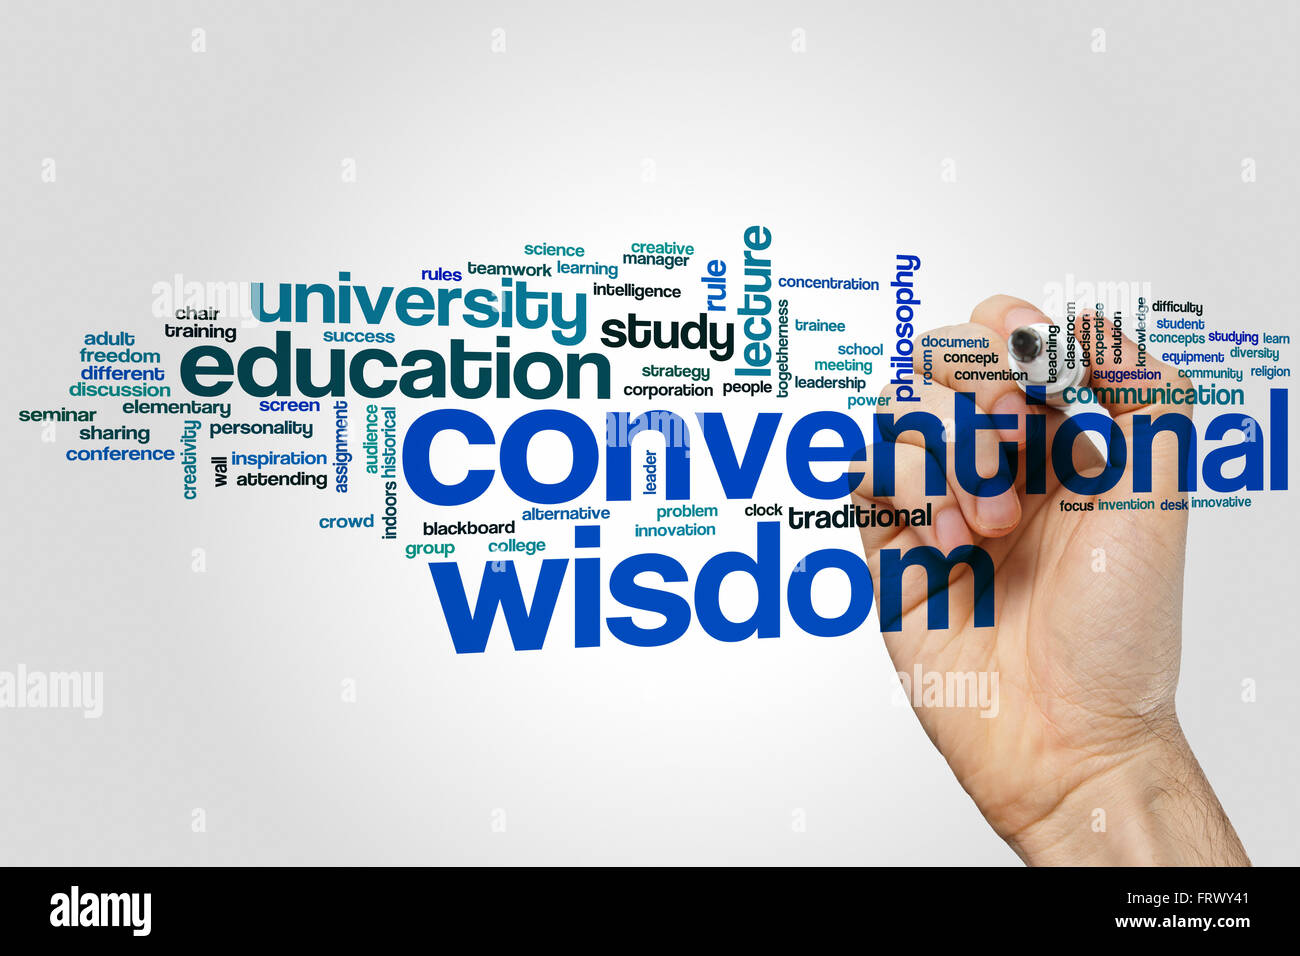 Conventional wisdom concept word cloud background Stock Photo